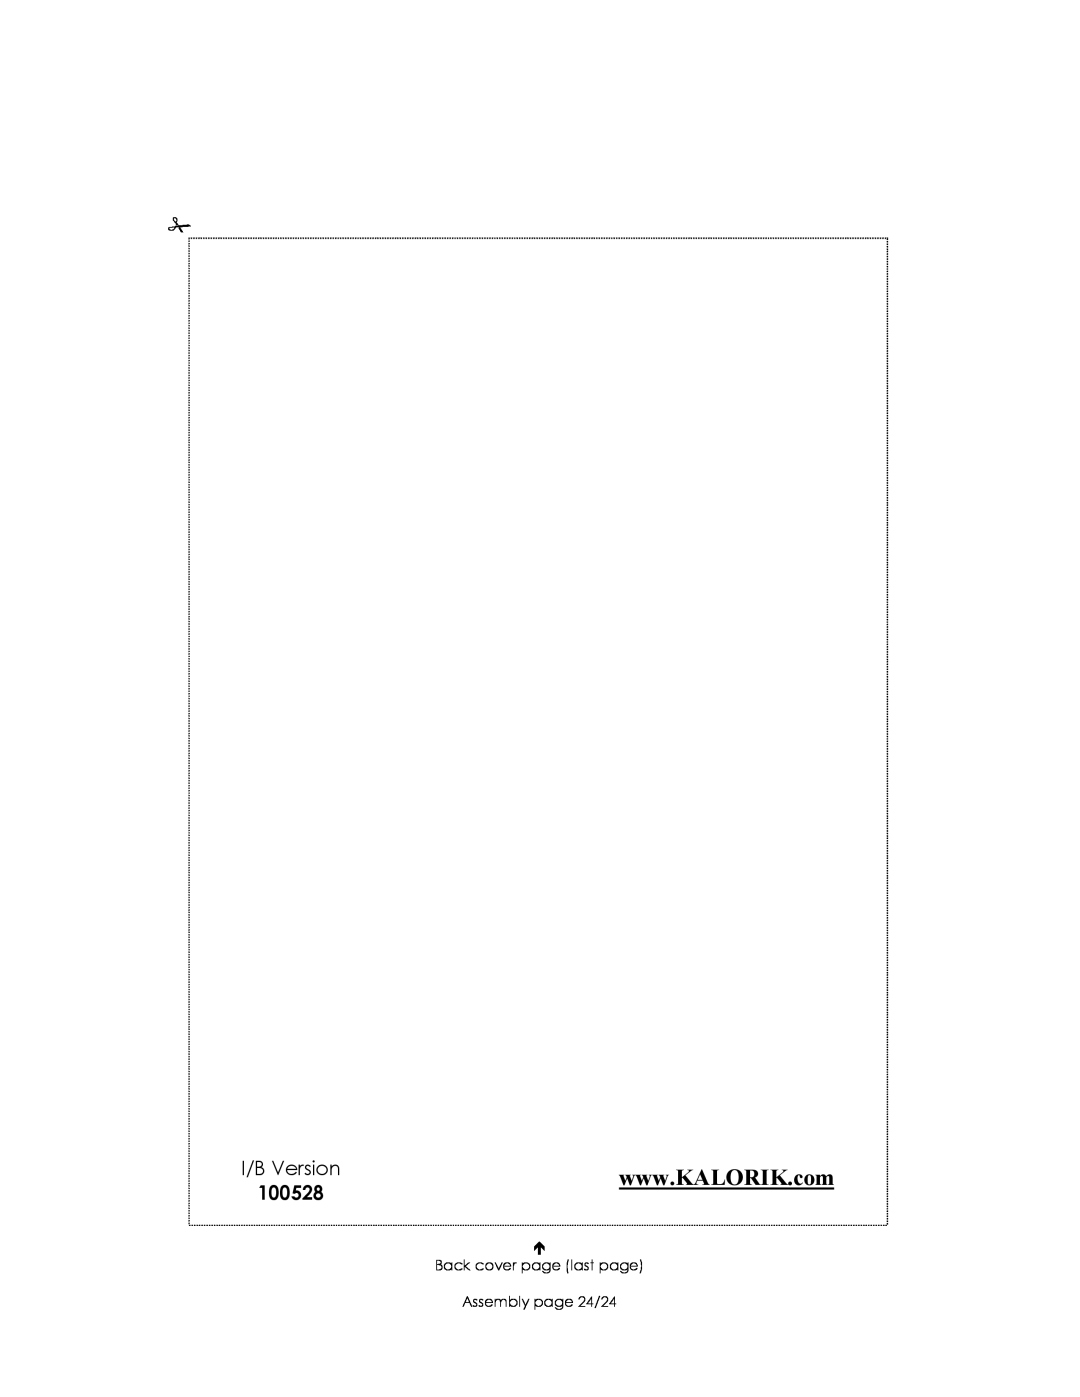 Kalorik USK WCL 32964 manual 100528, I/B Version, Back cover page last page Assembly page 24/24 